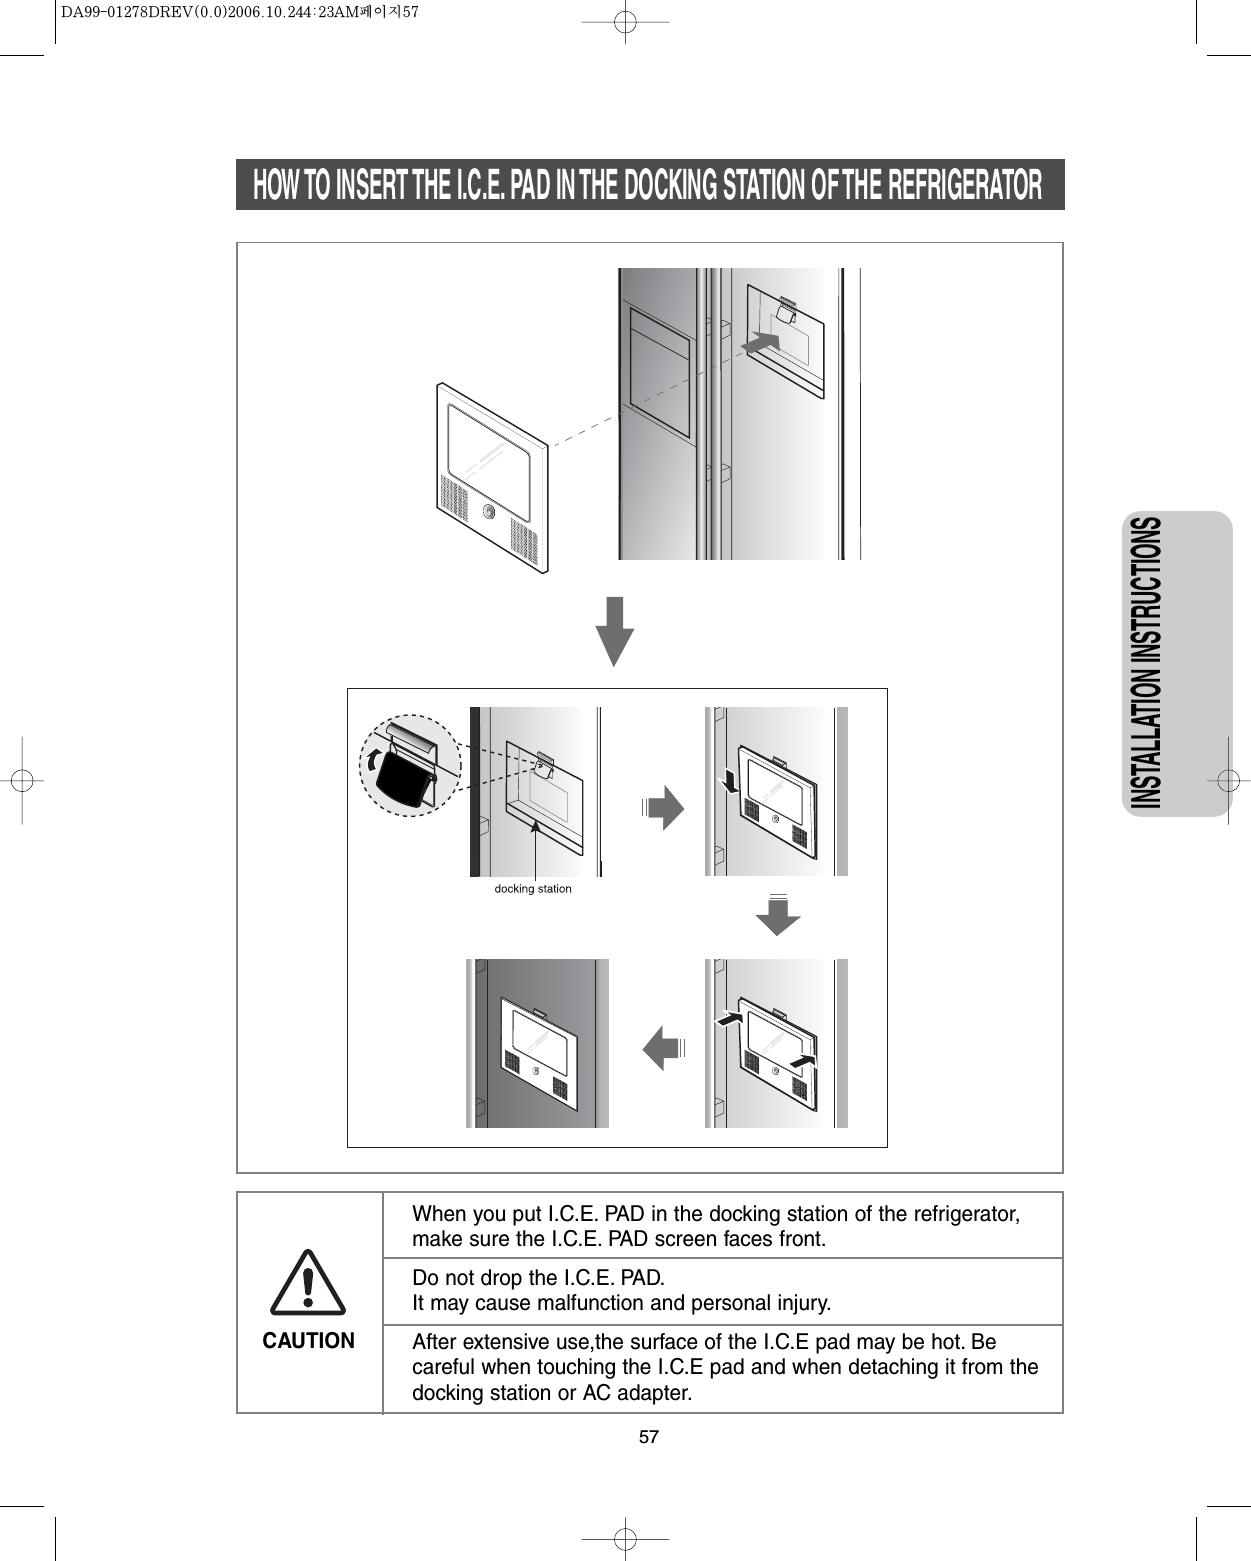 57CAUTIONWhen you put I.C.E. PAD in the docking station of the refrigerator,make sure the I.C.E. PAD screen faces front.Do not drop the I.C.E. PAD.It may cause malfunction and personal injury.After extensive use,the surface of the I.C.E pad may be hot. Becareful when touching the I.C.E pad and when detaching it from thedocking station or AC adapter.HOW TO INSERT THE I.C.E. PAD IN THE DOCKING STATION OF THE REFRIGERATORINSTALLATION INSTRUCTIONS